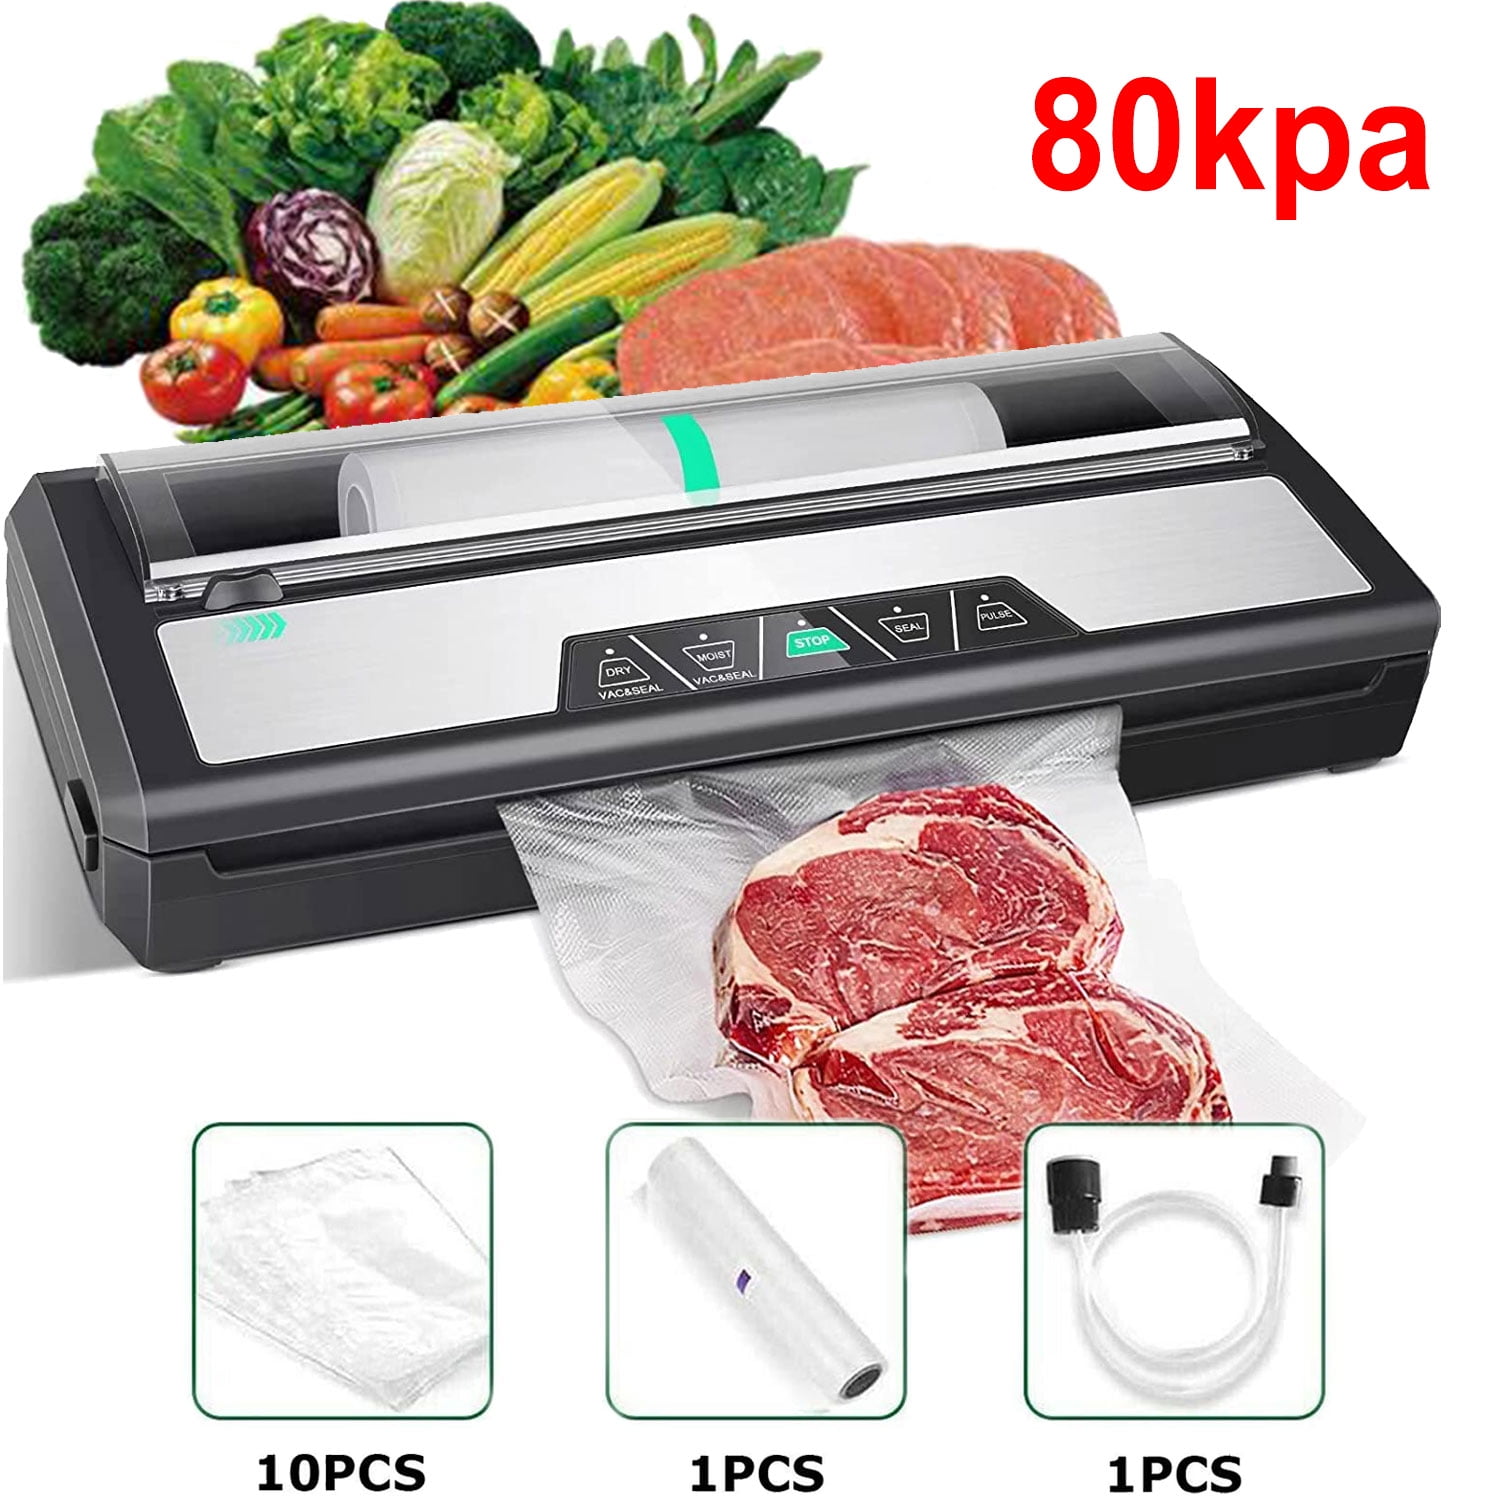  Toprime Vacuum Sealer Machine VS6612, 80Kpa Powerful Food  Sealer Built-in Cutter with Sealing Bag and Hose, Vacuum Air Sealing System  for Seal a Meal and Sous Vide: Home & Kitchen